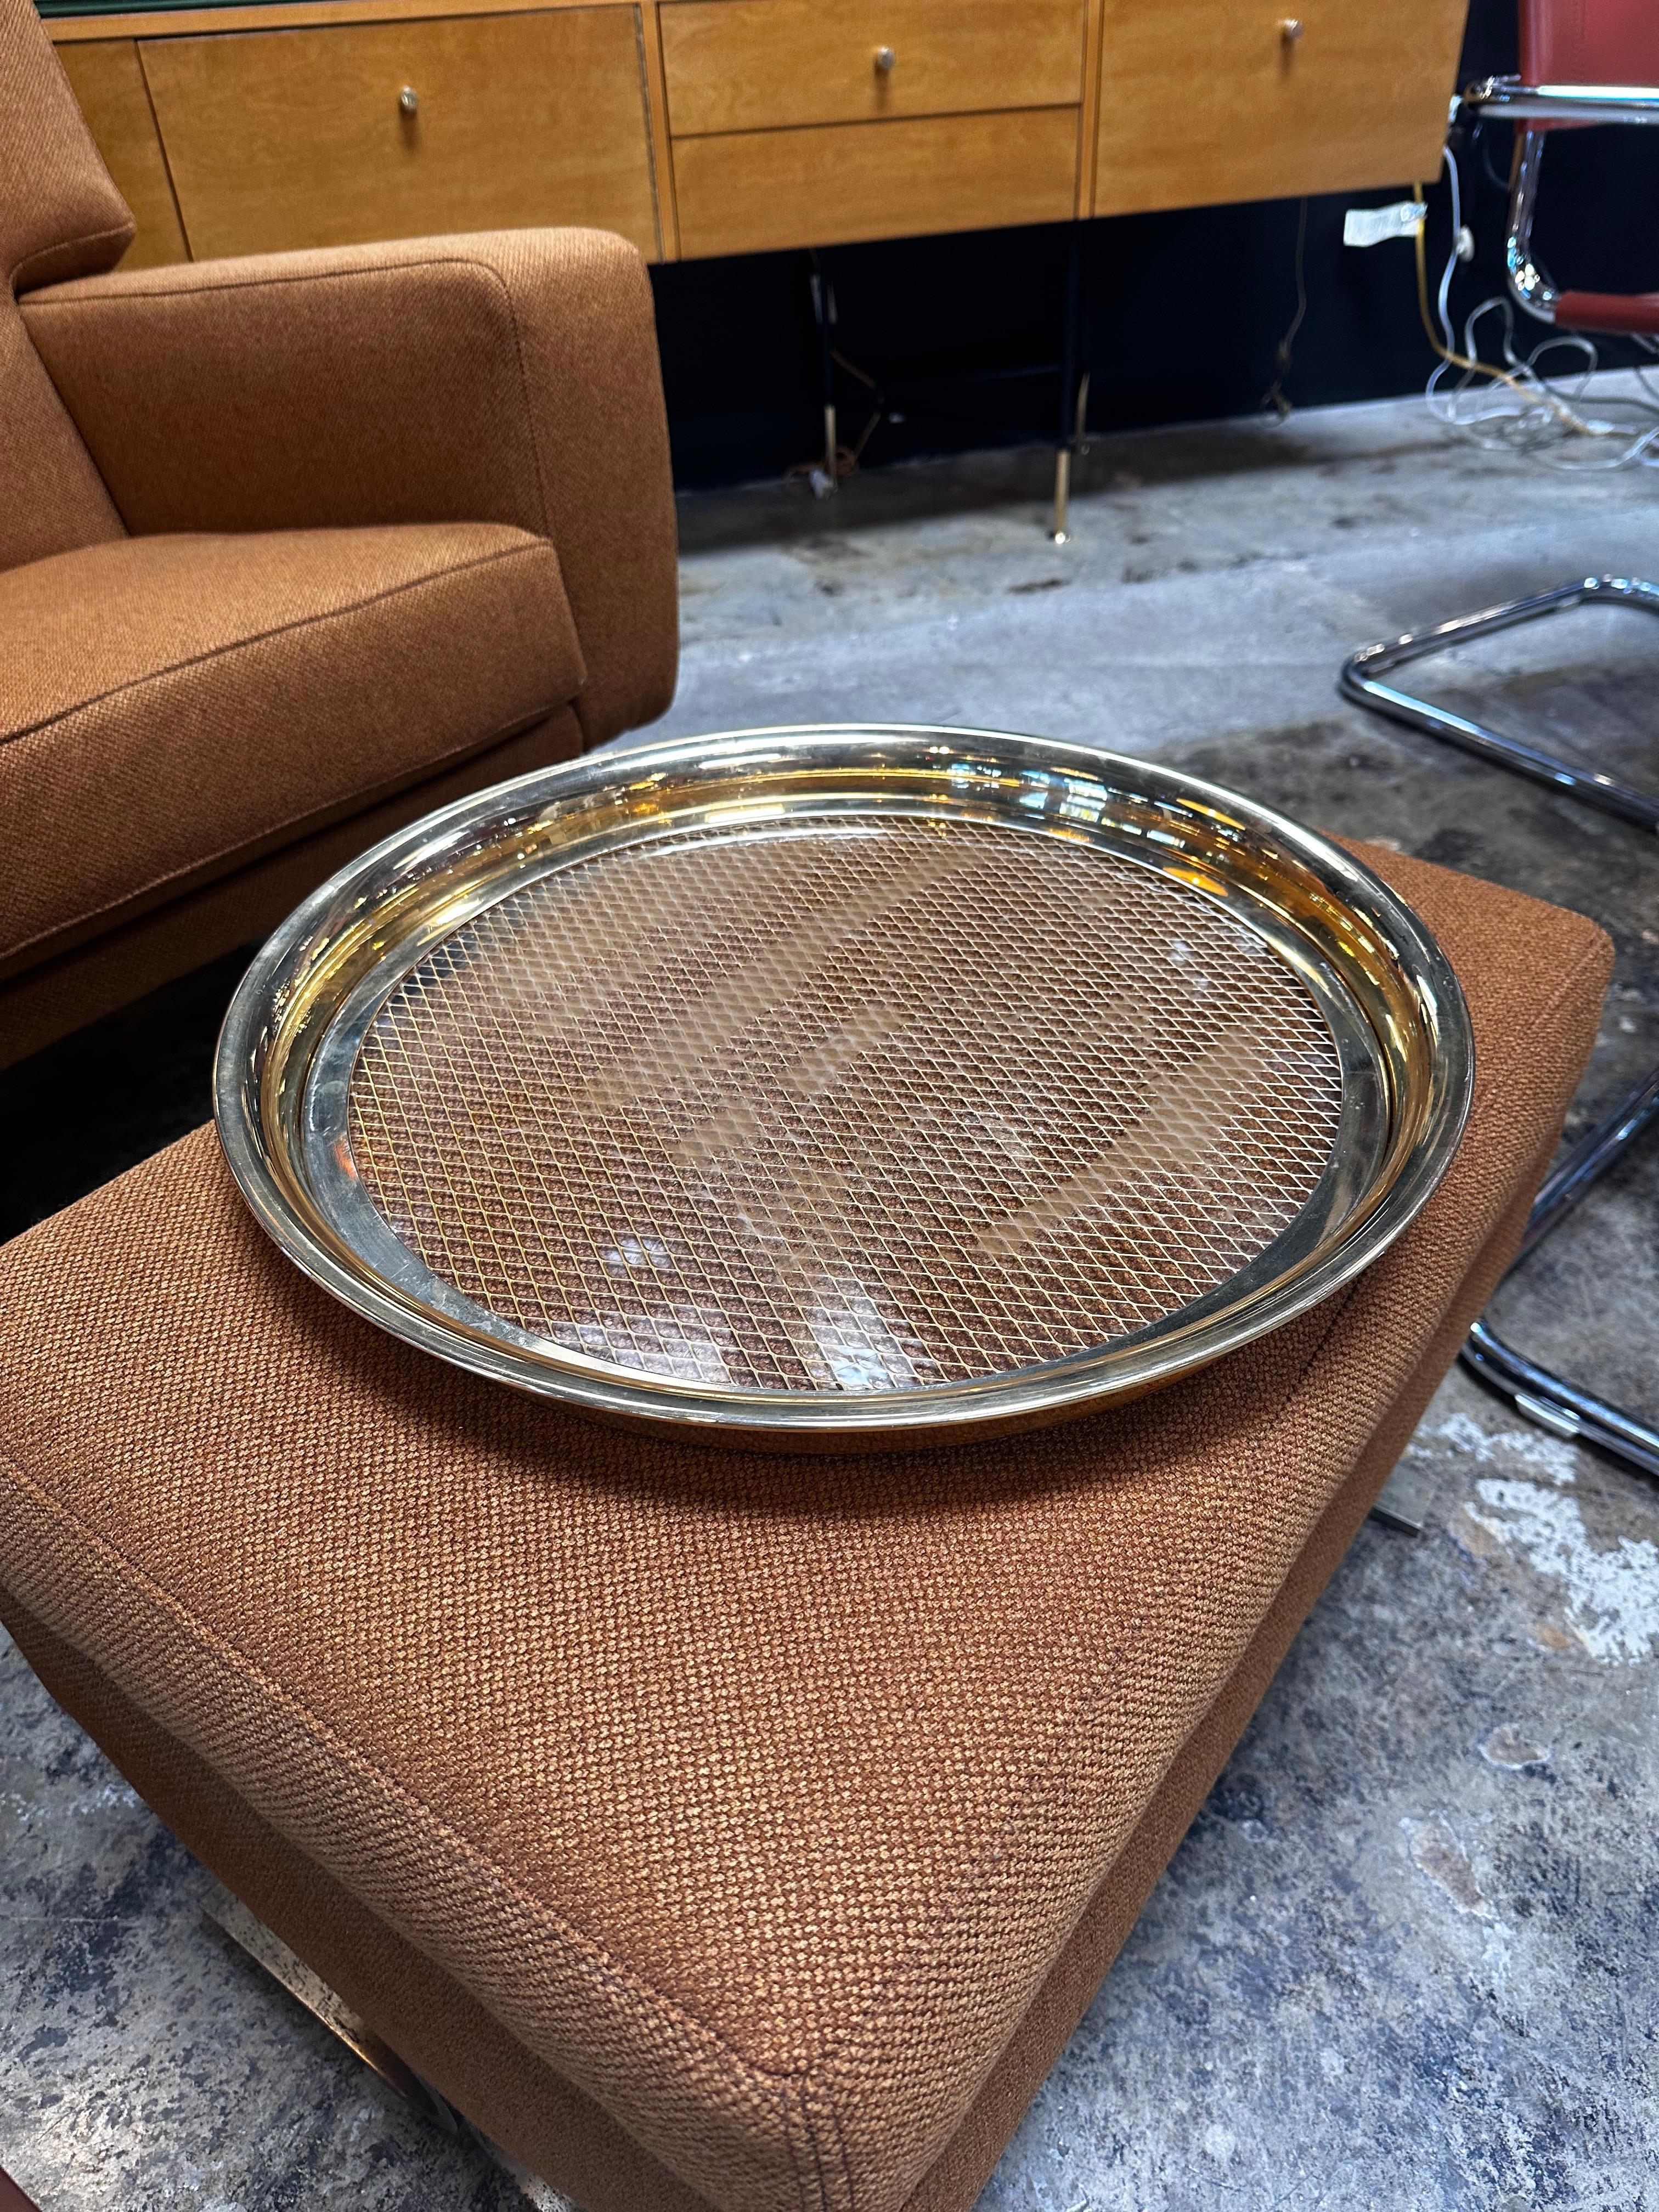 The Vintage Decorative Italian Round Brass and Glass Tray from the 1980s is a stunning fusion of materials and design. The round tray features a sophisticated combination of brass and glass, creating an exquisite visual contrast. Crafted with